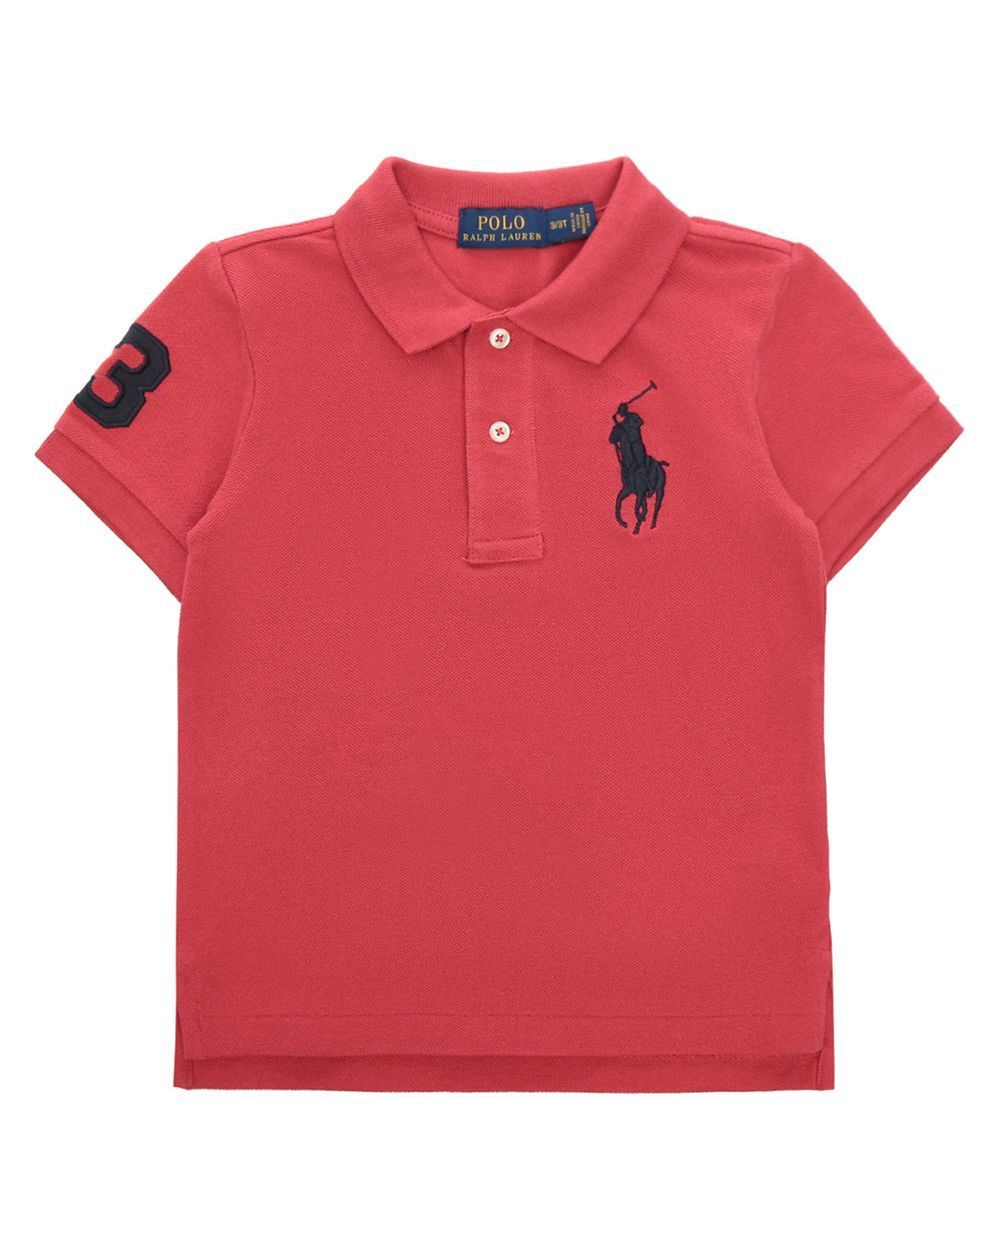 Polo Ralph Lauren Infant Red Embroidered Cotton Mesh Polo Shirt 